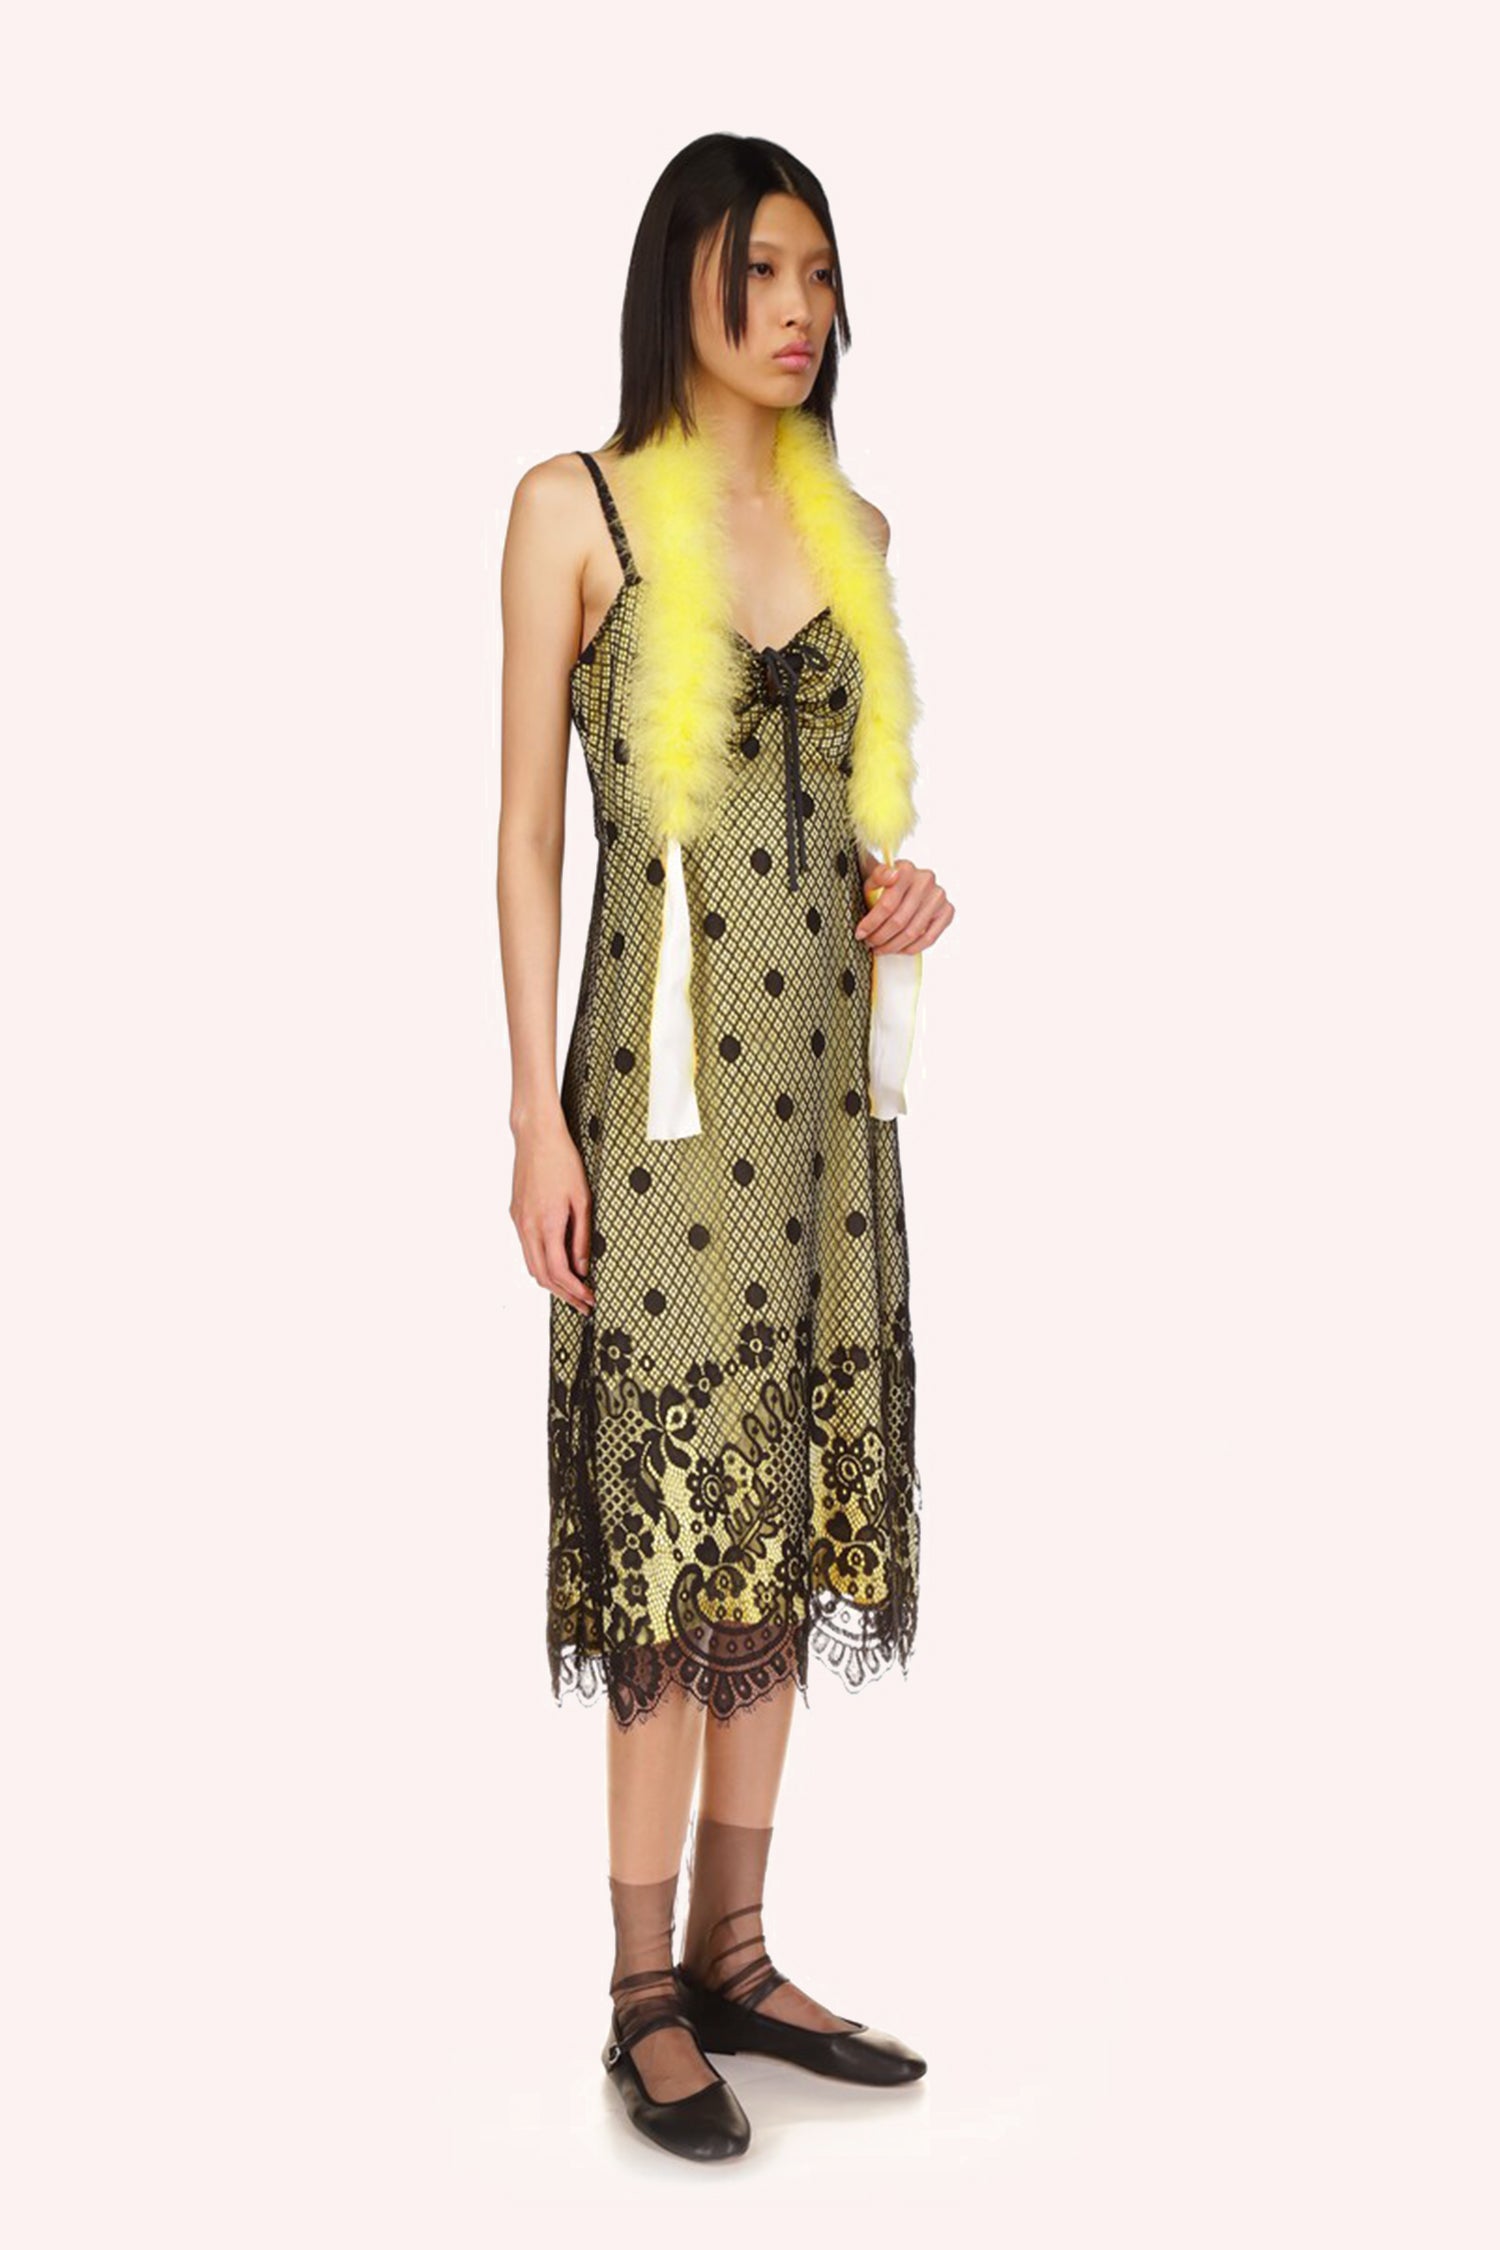 Marabou Boas Canary Yellow, gorgeous fake fur boa scarf pair amazingly well with Anna Sui dresses